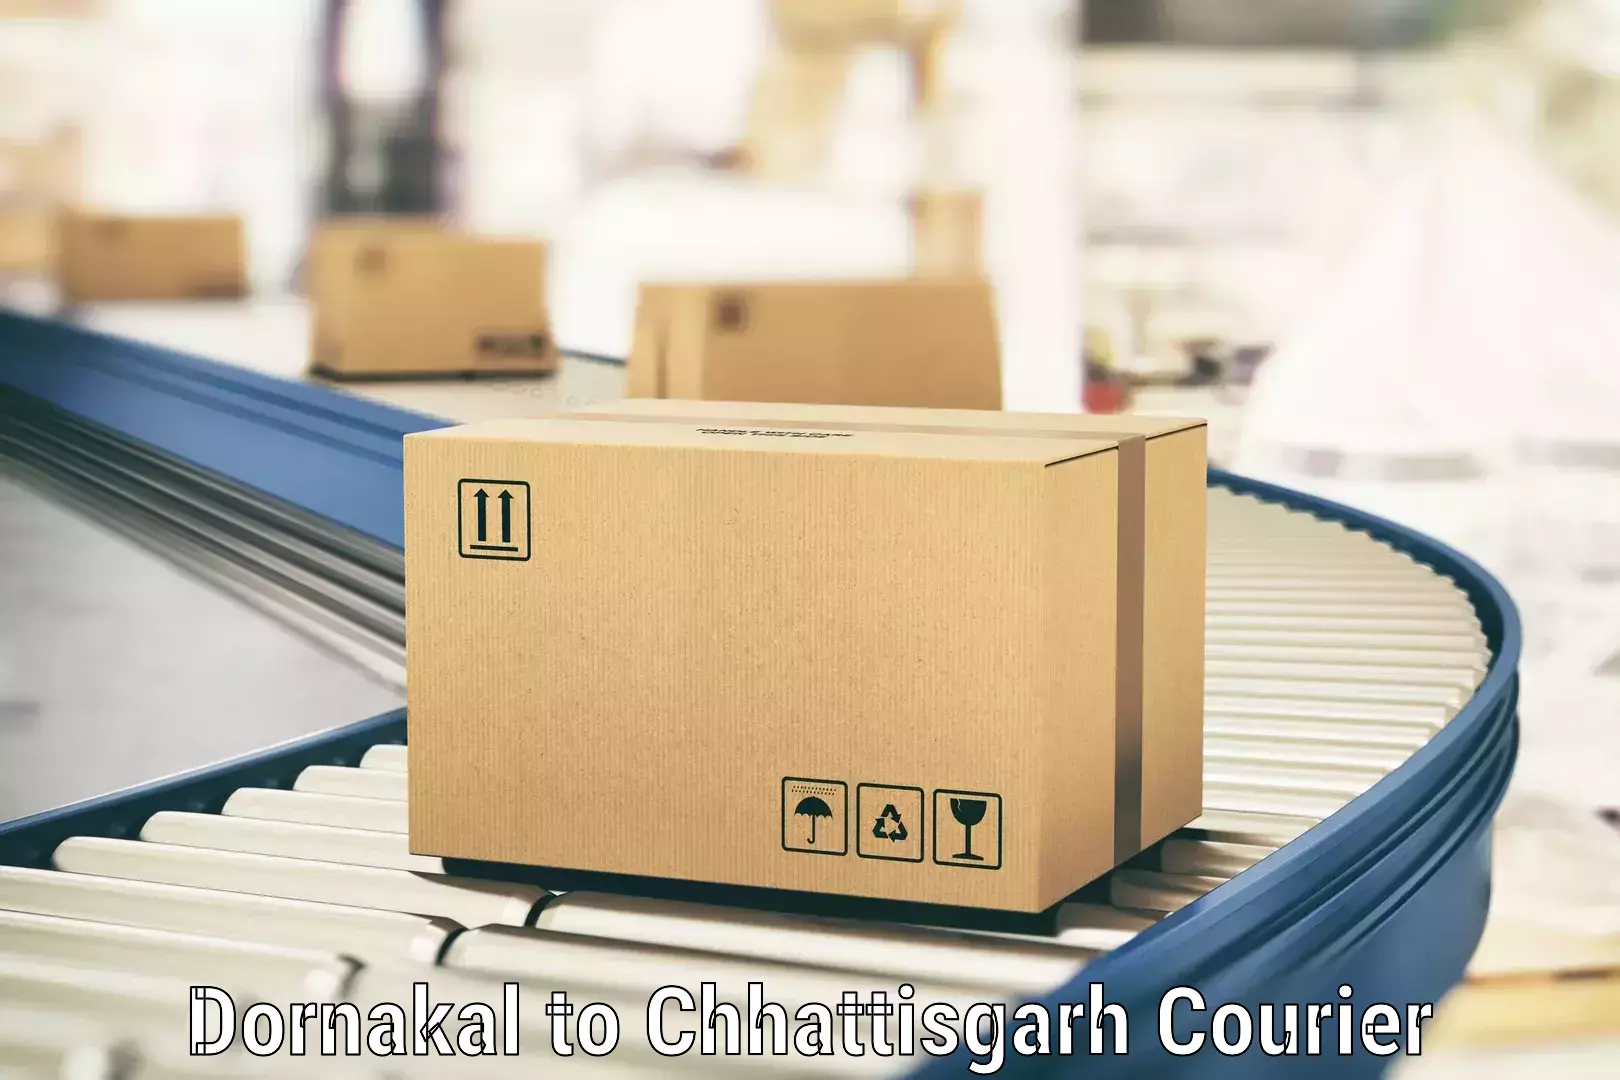 Comprehensive parcel tracking Dornakal to Raigarh